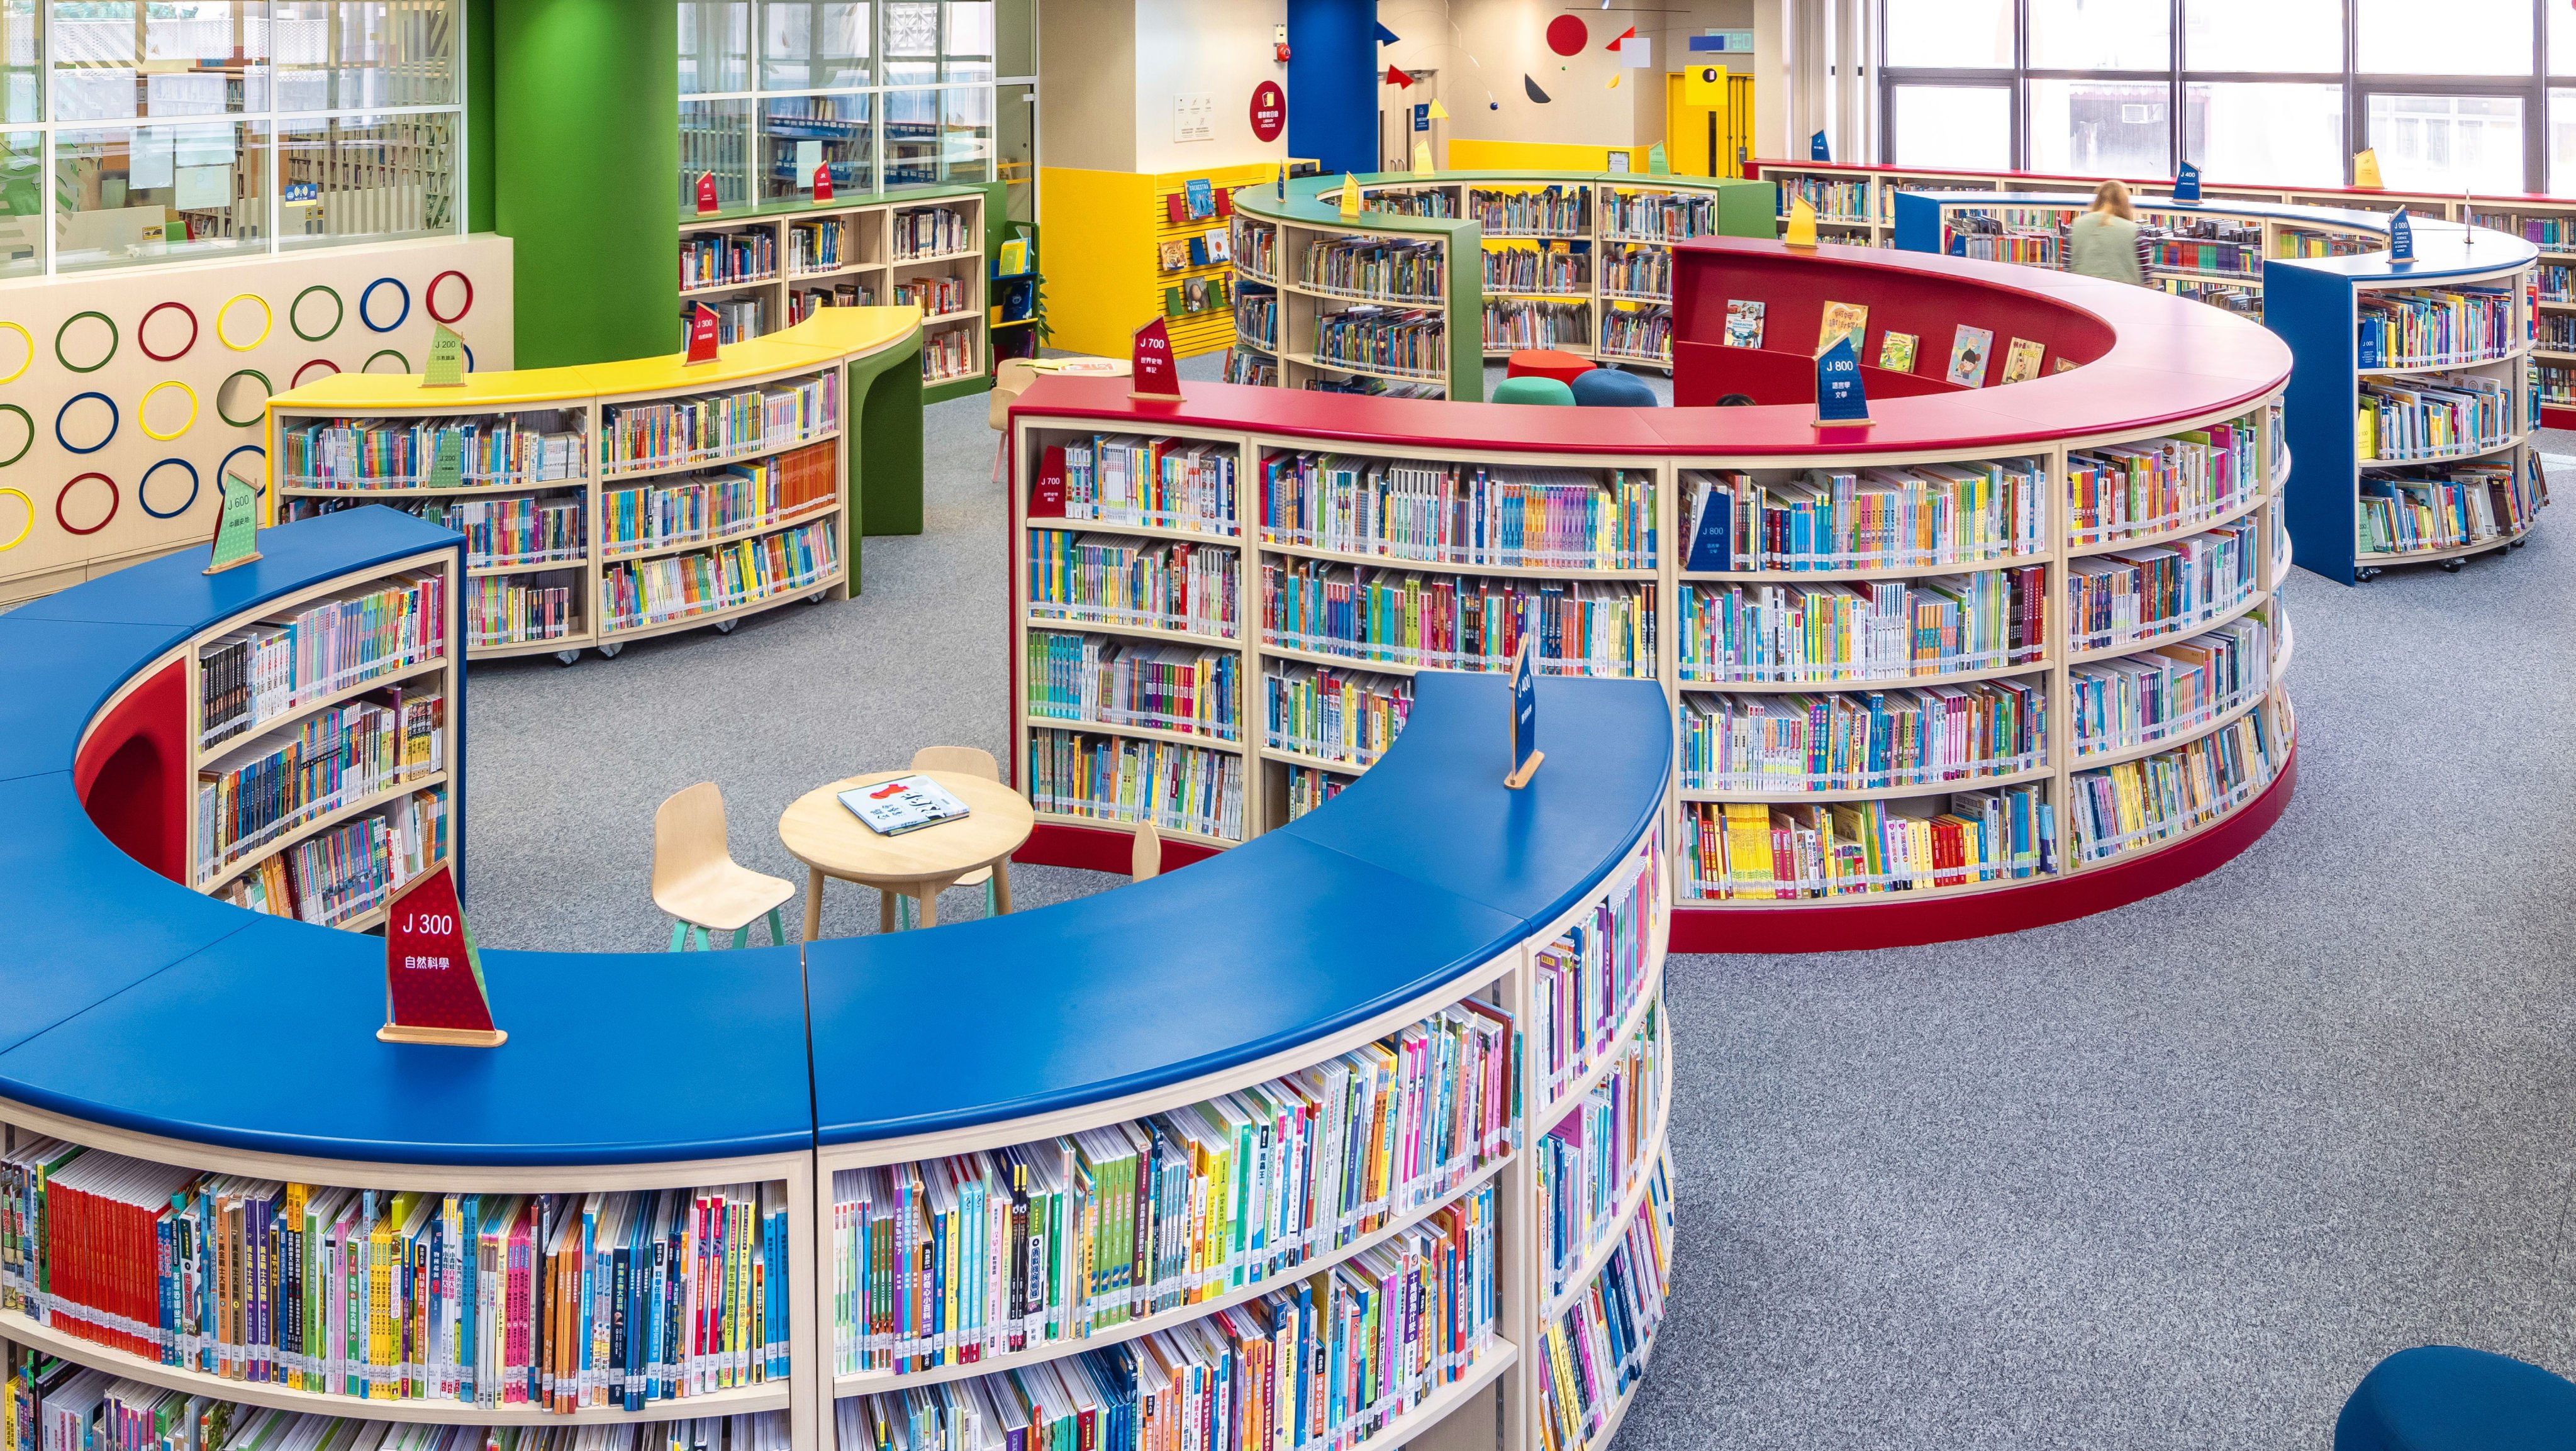 The redesigned children’s section of the library in Aberdeen, Hong Kong, with colourful, movable shelves in a variety of shapes and tunnels for children to explore. Photo: Tugo Cheng Photography